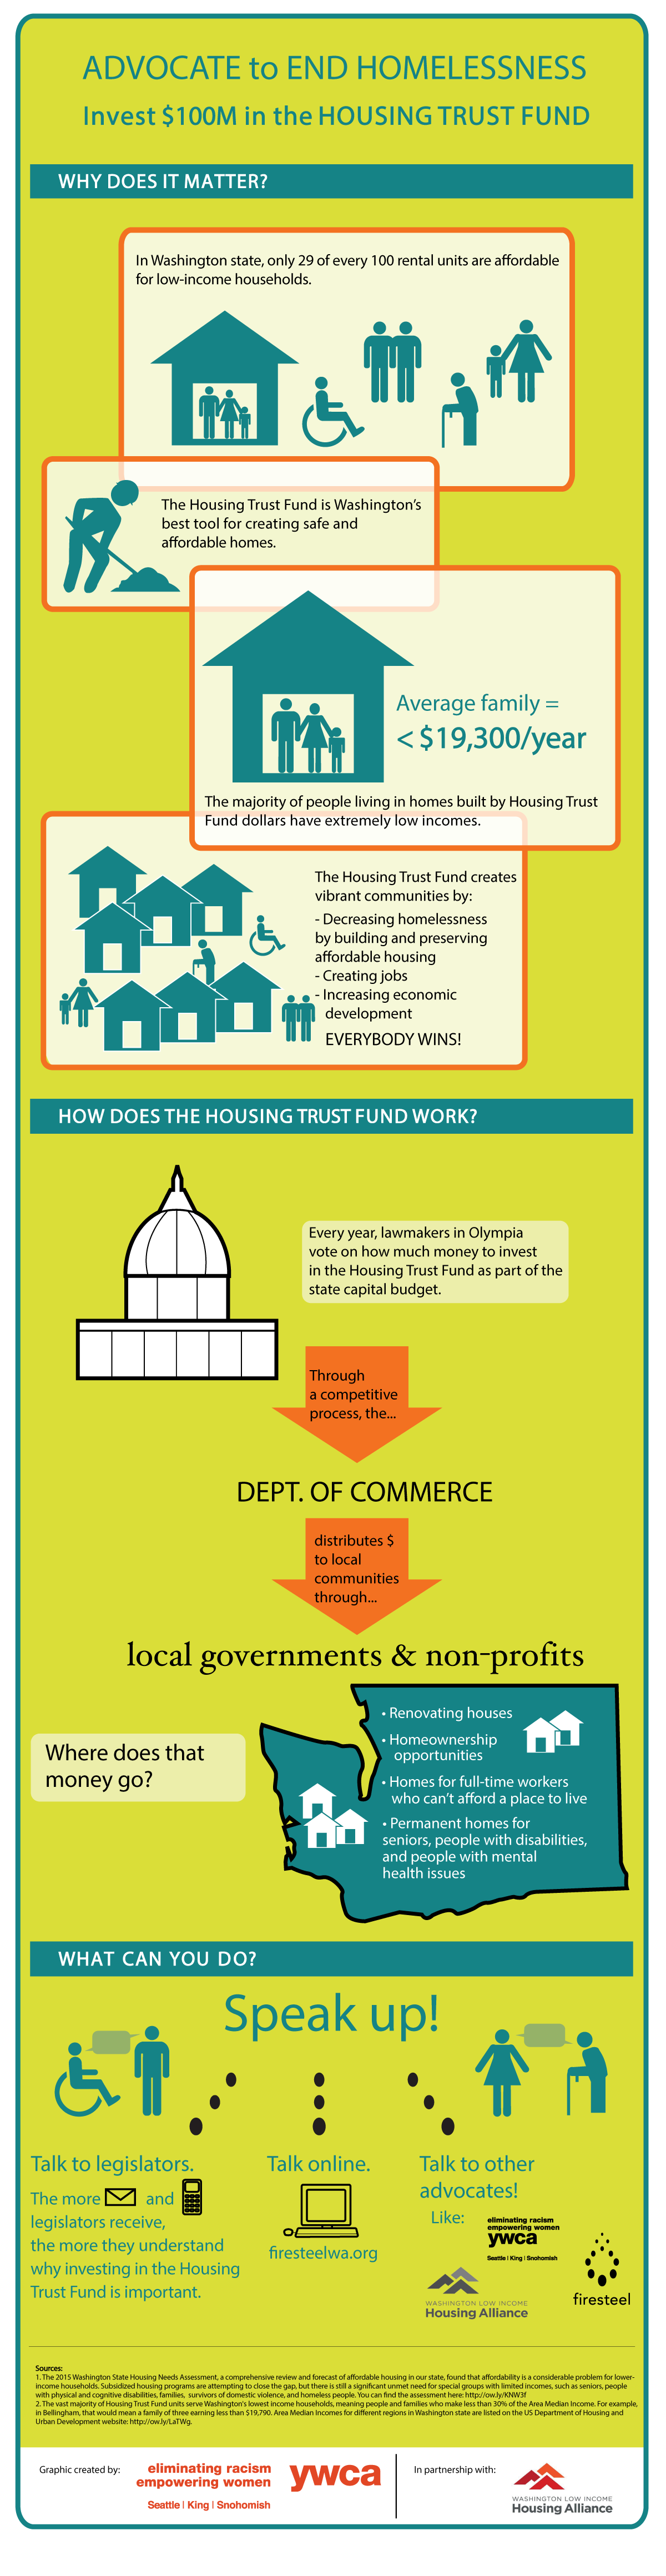 CREVAWC on X: Do women's shelters need money or items? The answer is both!  Check out this helpful infographic if you are wondering how you can donate  to women's shelters this holiday